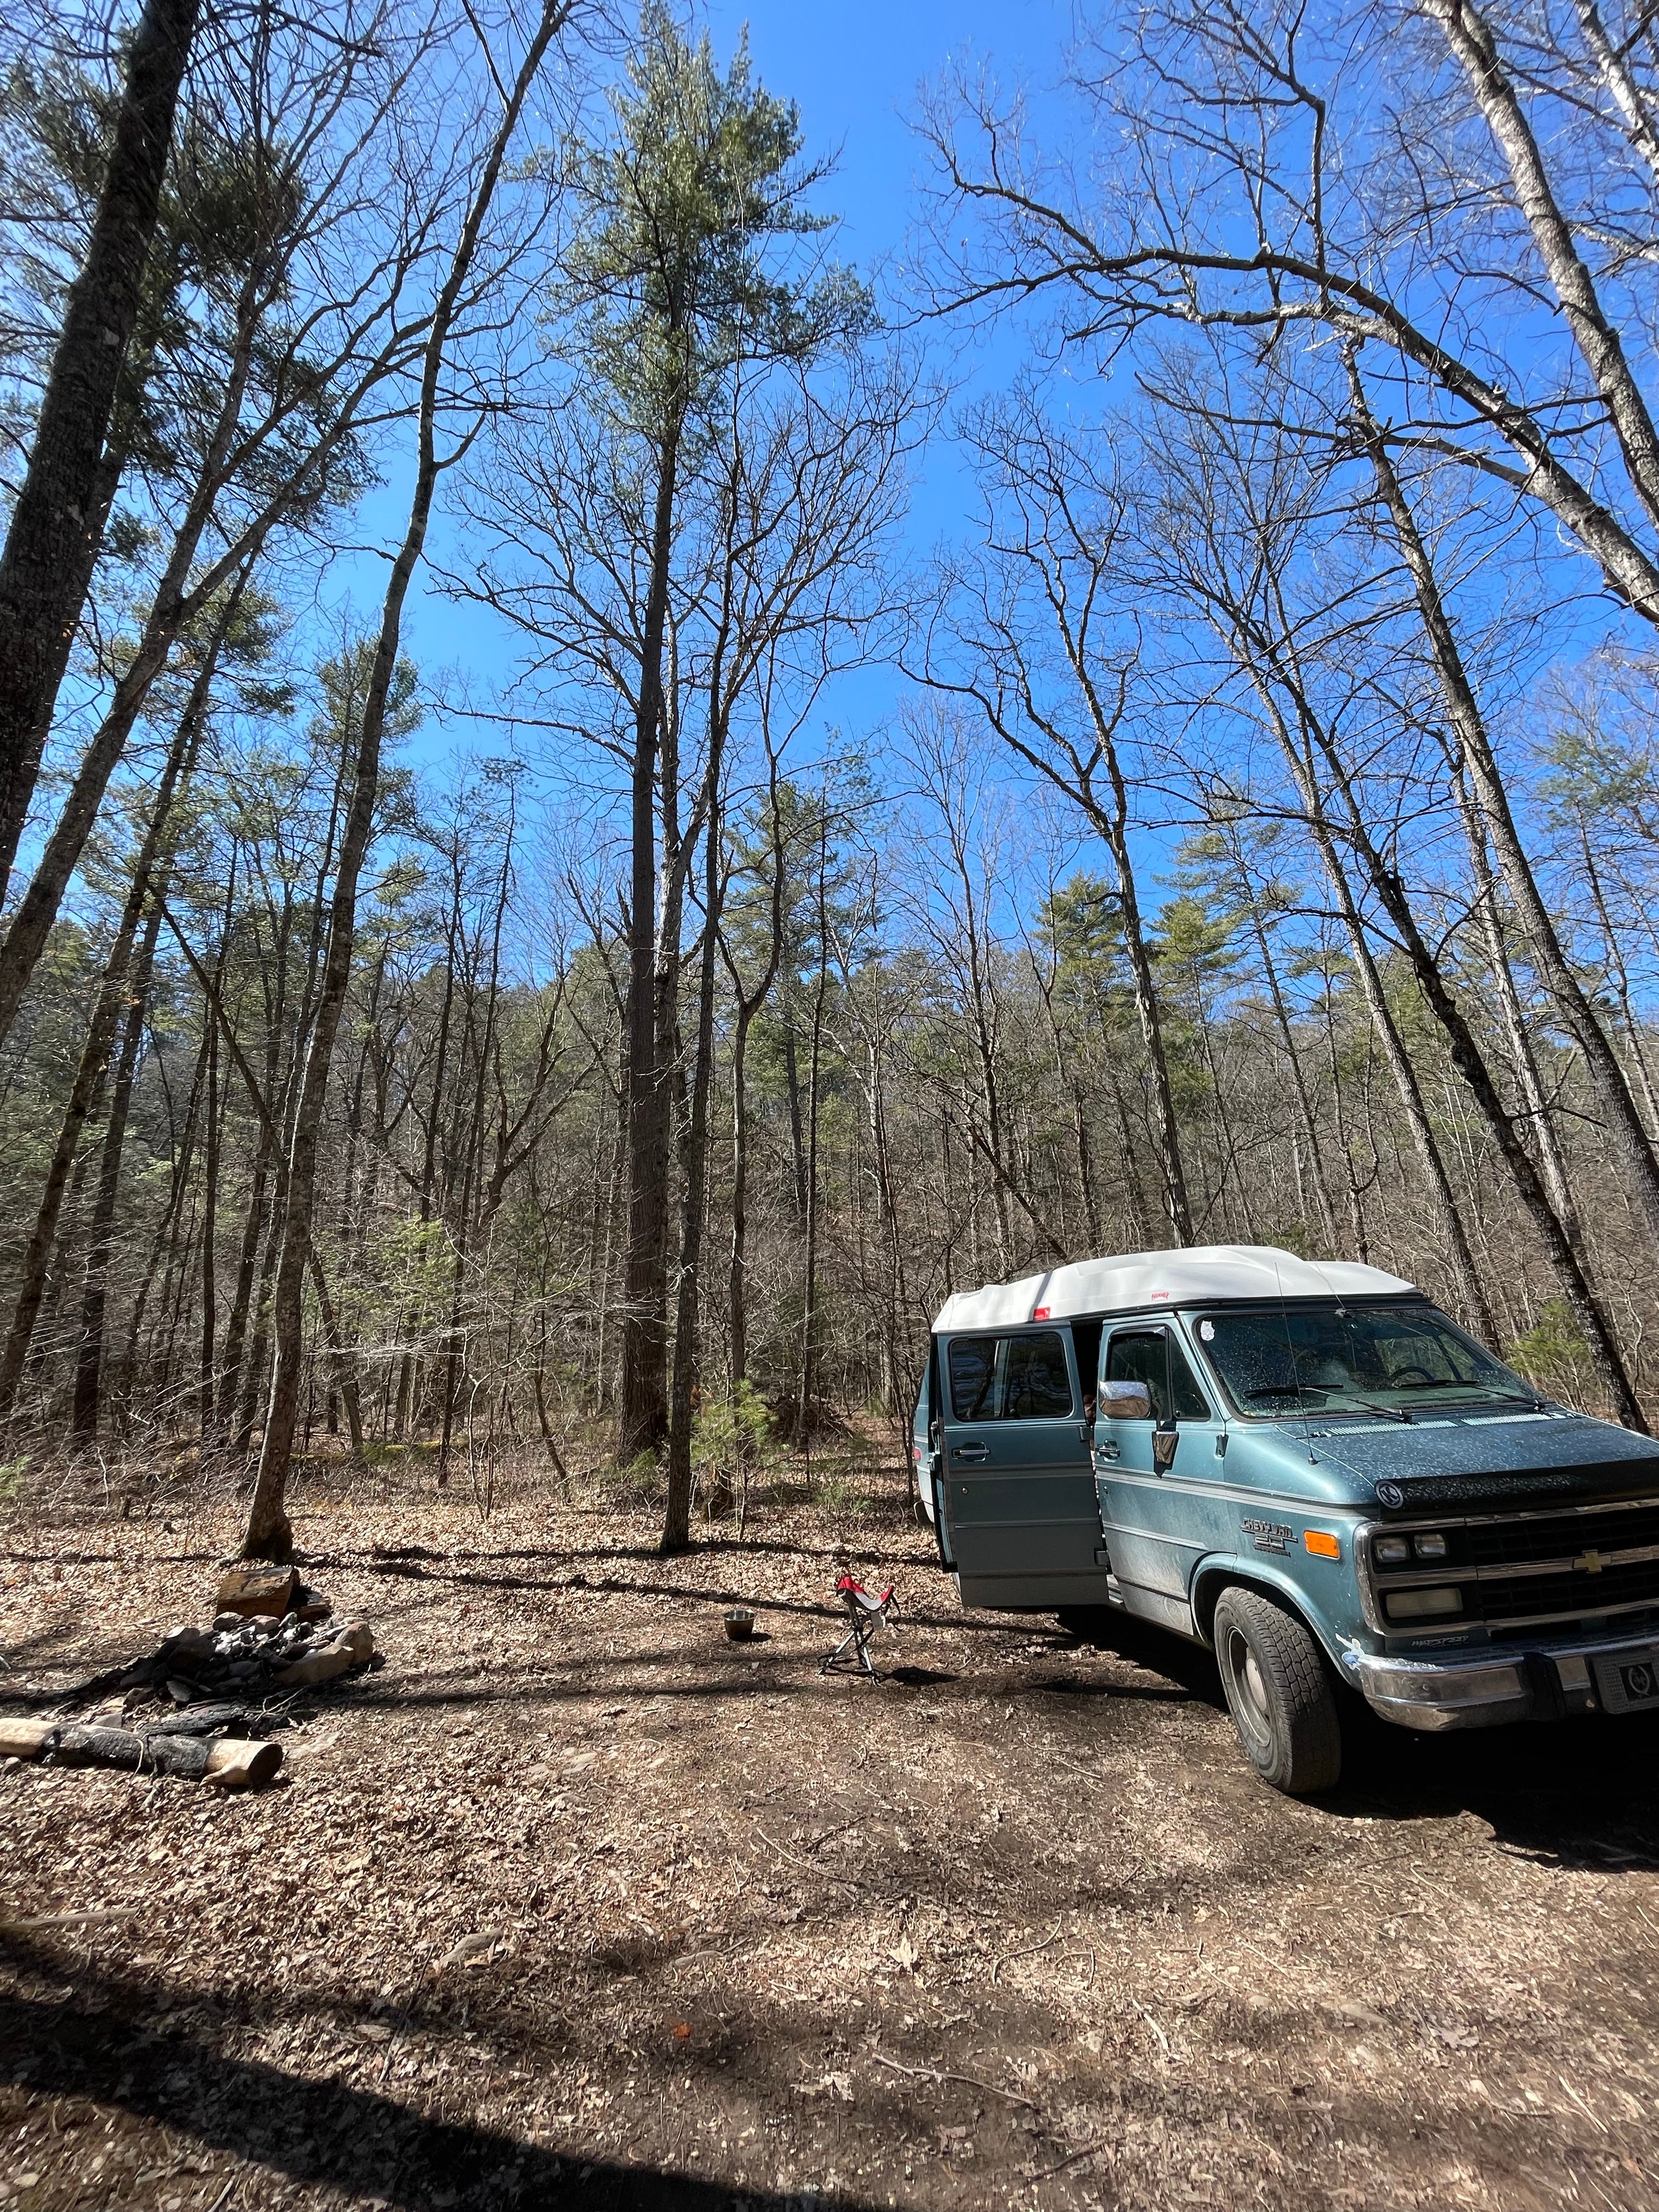 Camper submitted image from Braley Pond Dispersed Camping & Day Use Area - 2